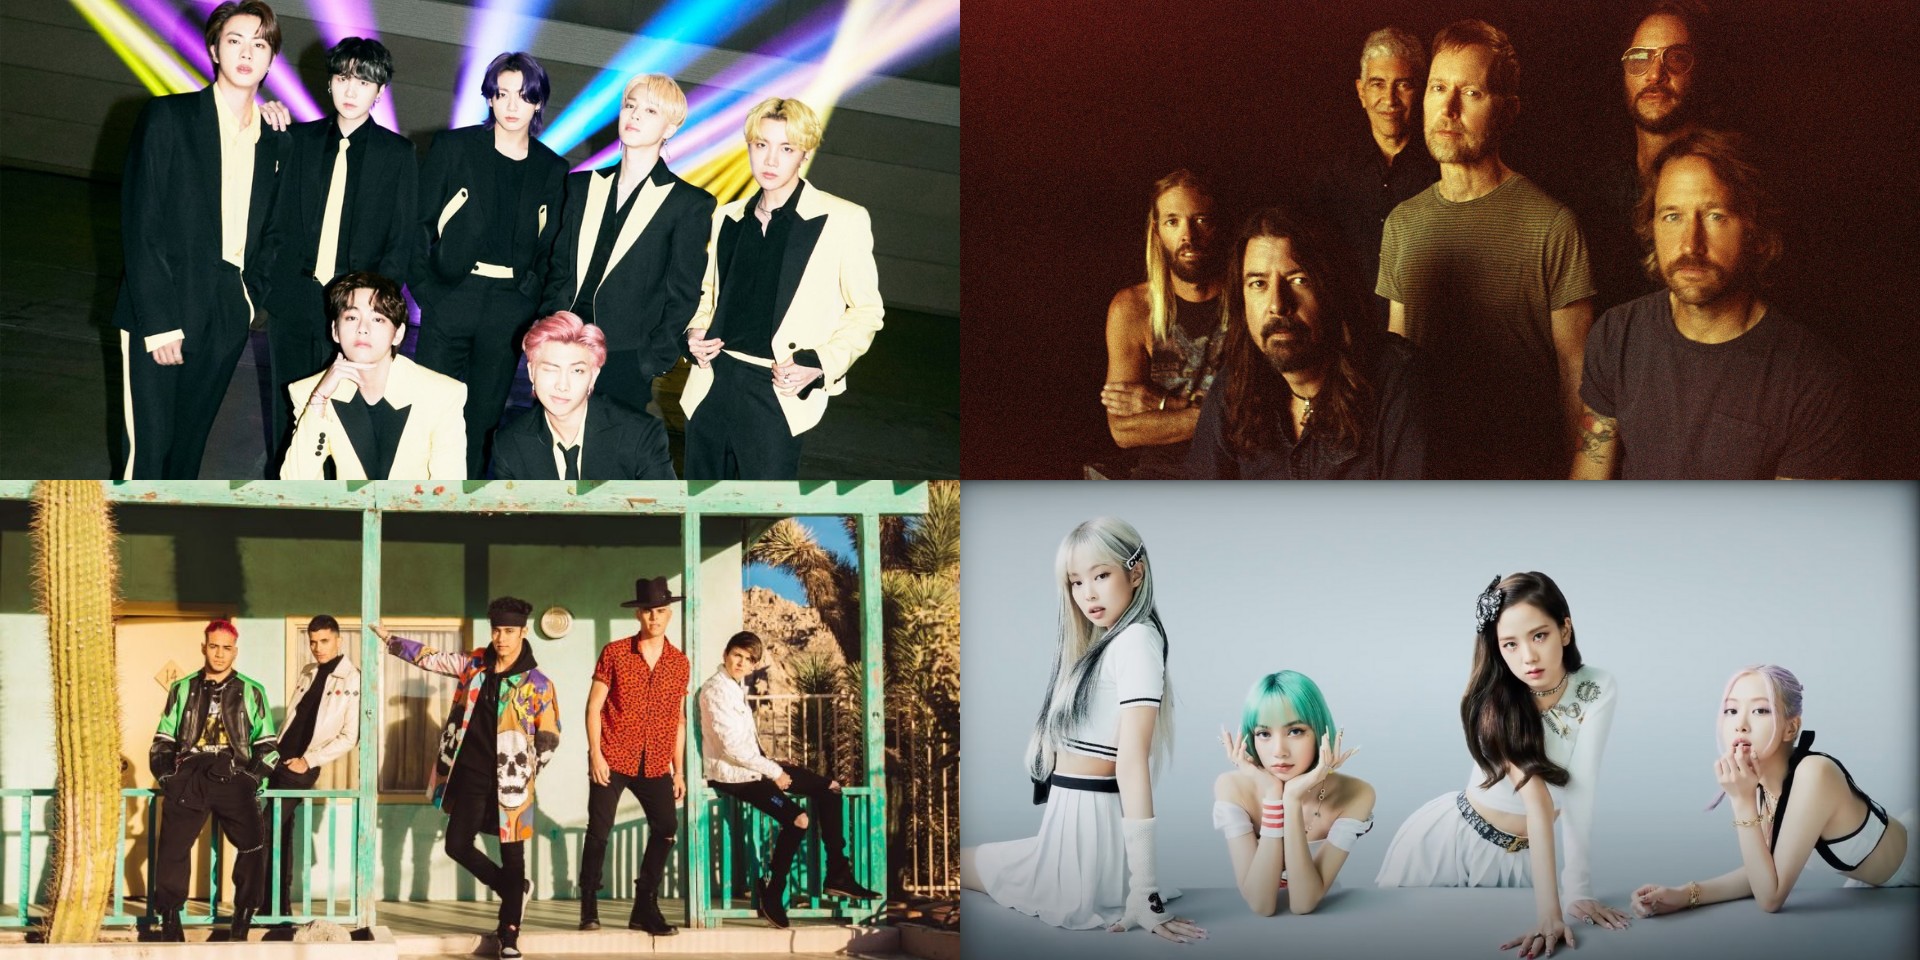 BTS, BLACKPINK, Foo Fighters, CNCO, and more nominated for Group of the Year at the 2021 MTV Video Music Awards